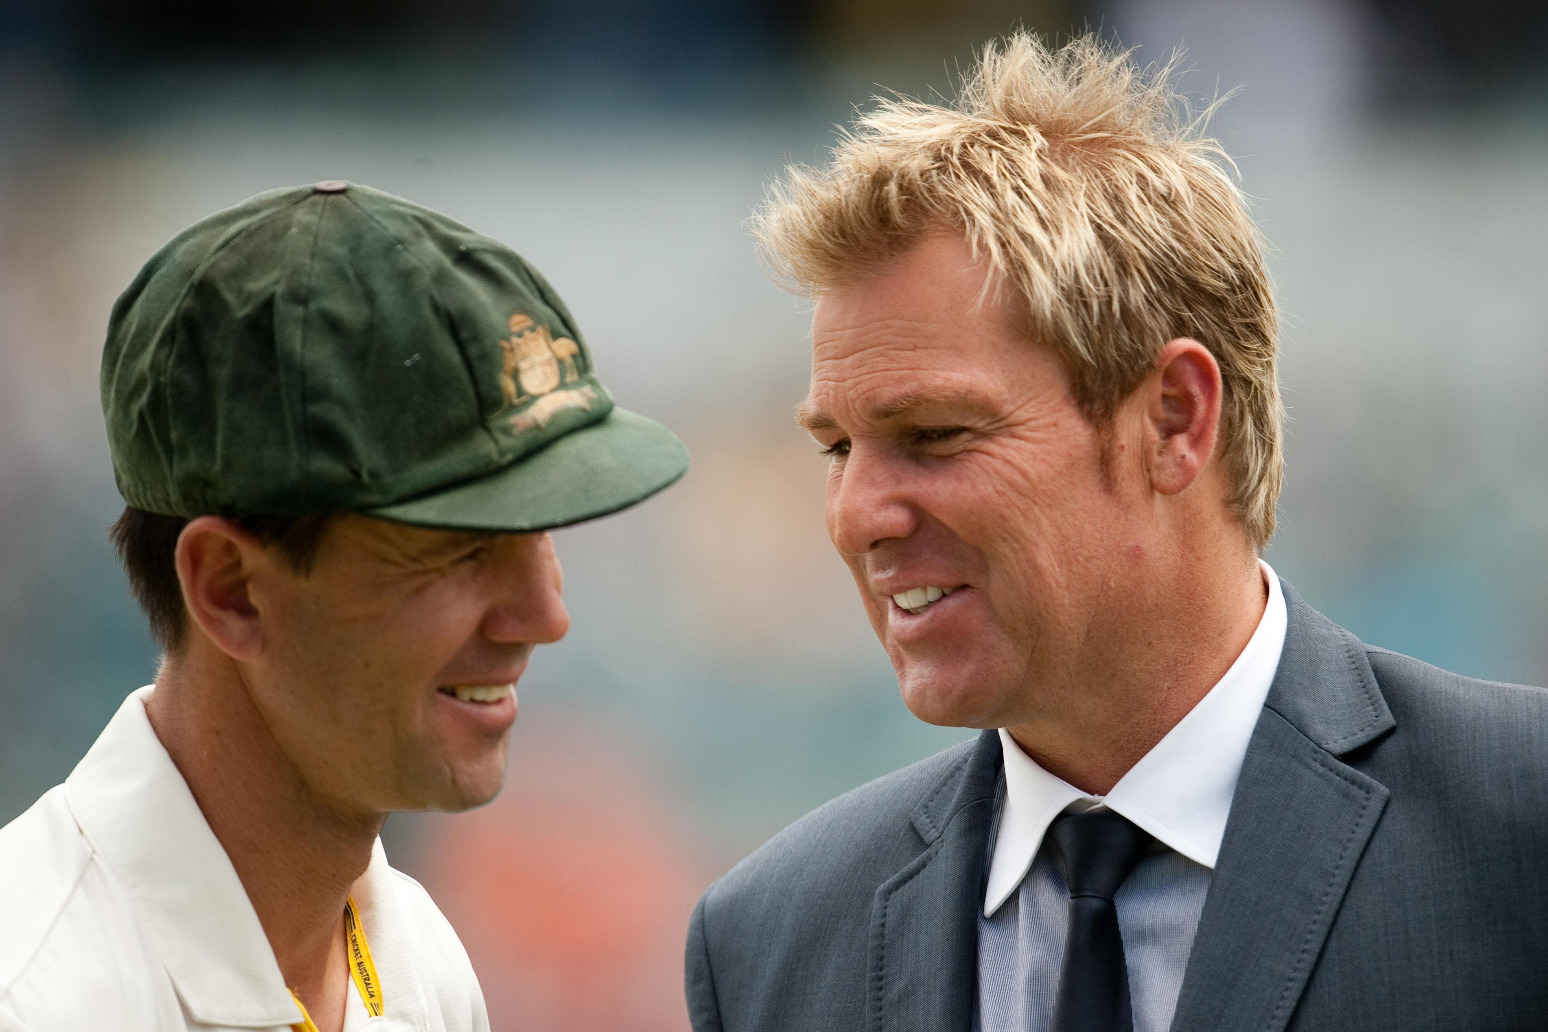 Shane Warne remembered as much loved cricketing legend at moving state funeral